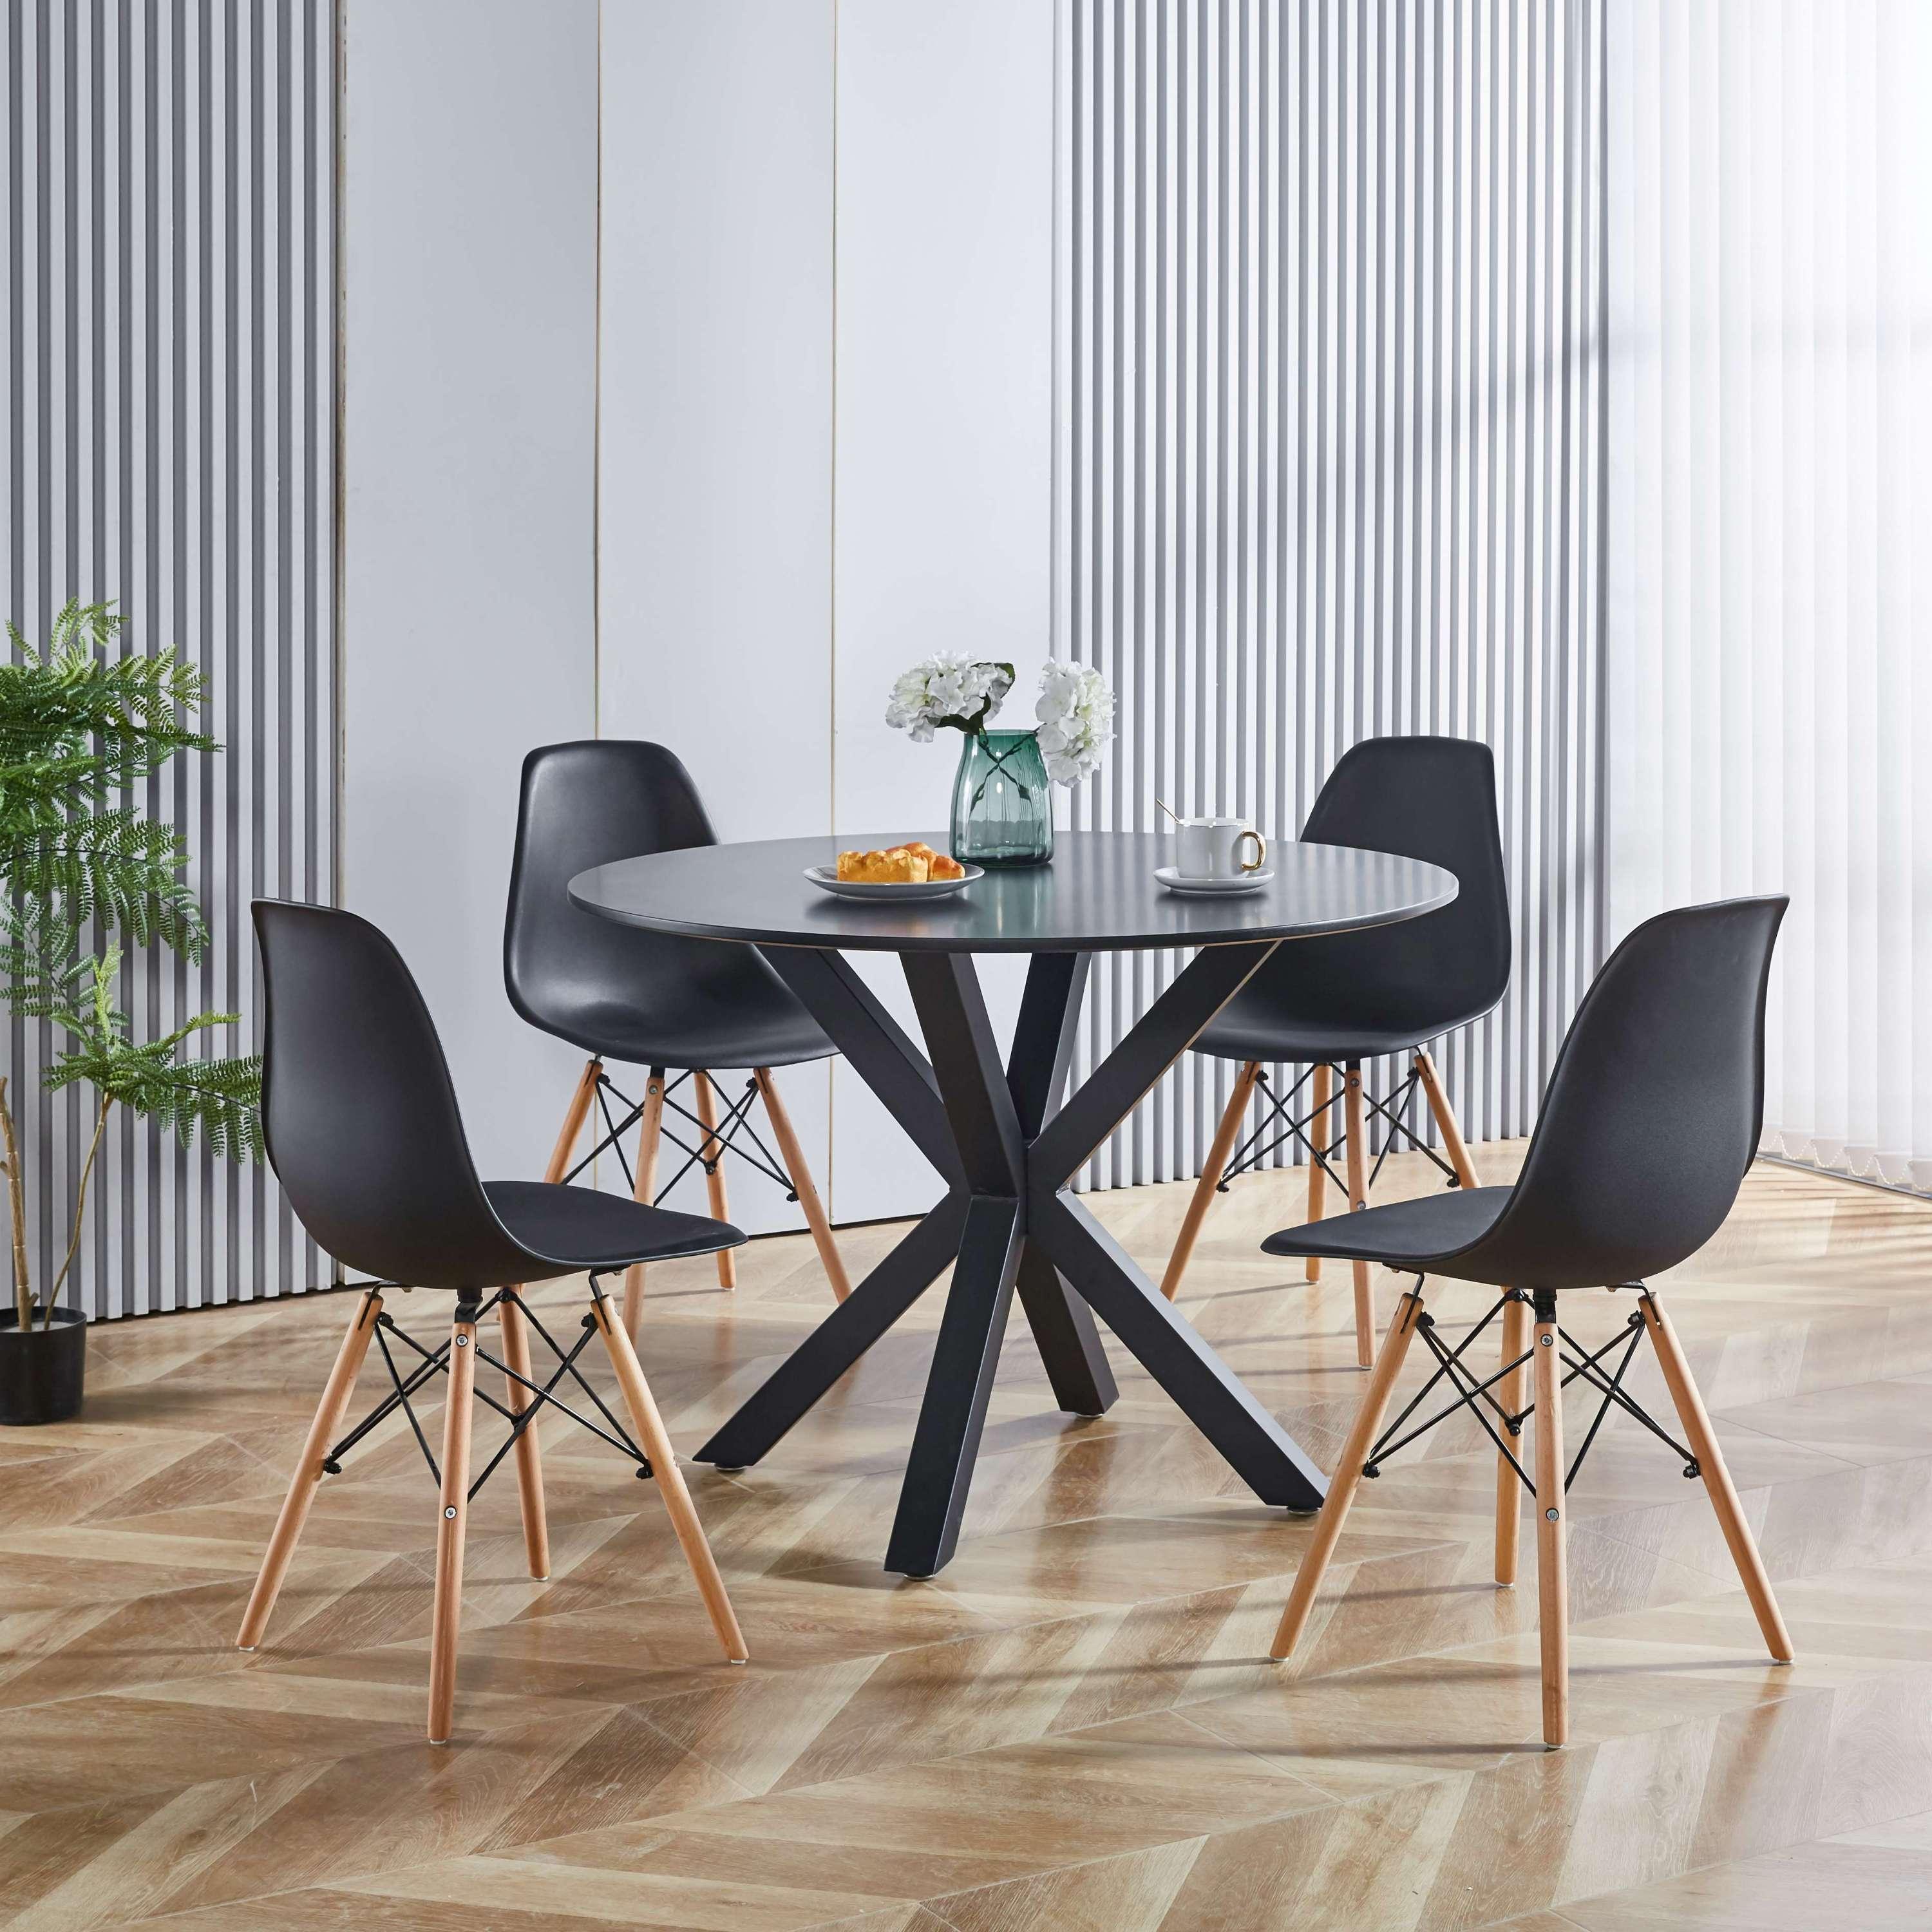 🆓🚛 5 Pcs Dining Set, 1 Round Mid-Century Dining Table With Mdf Table Top, 4 Black Chairs